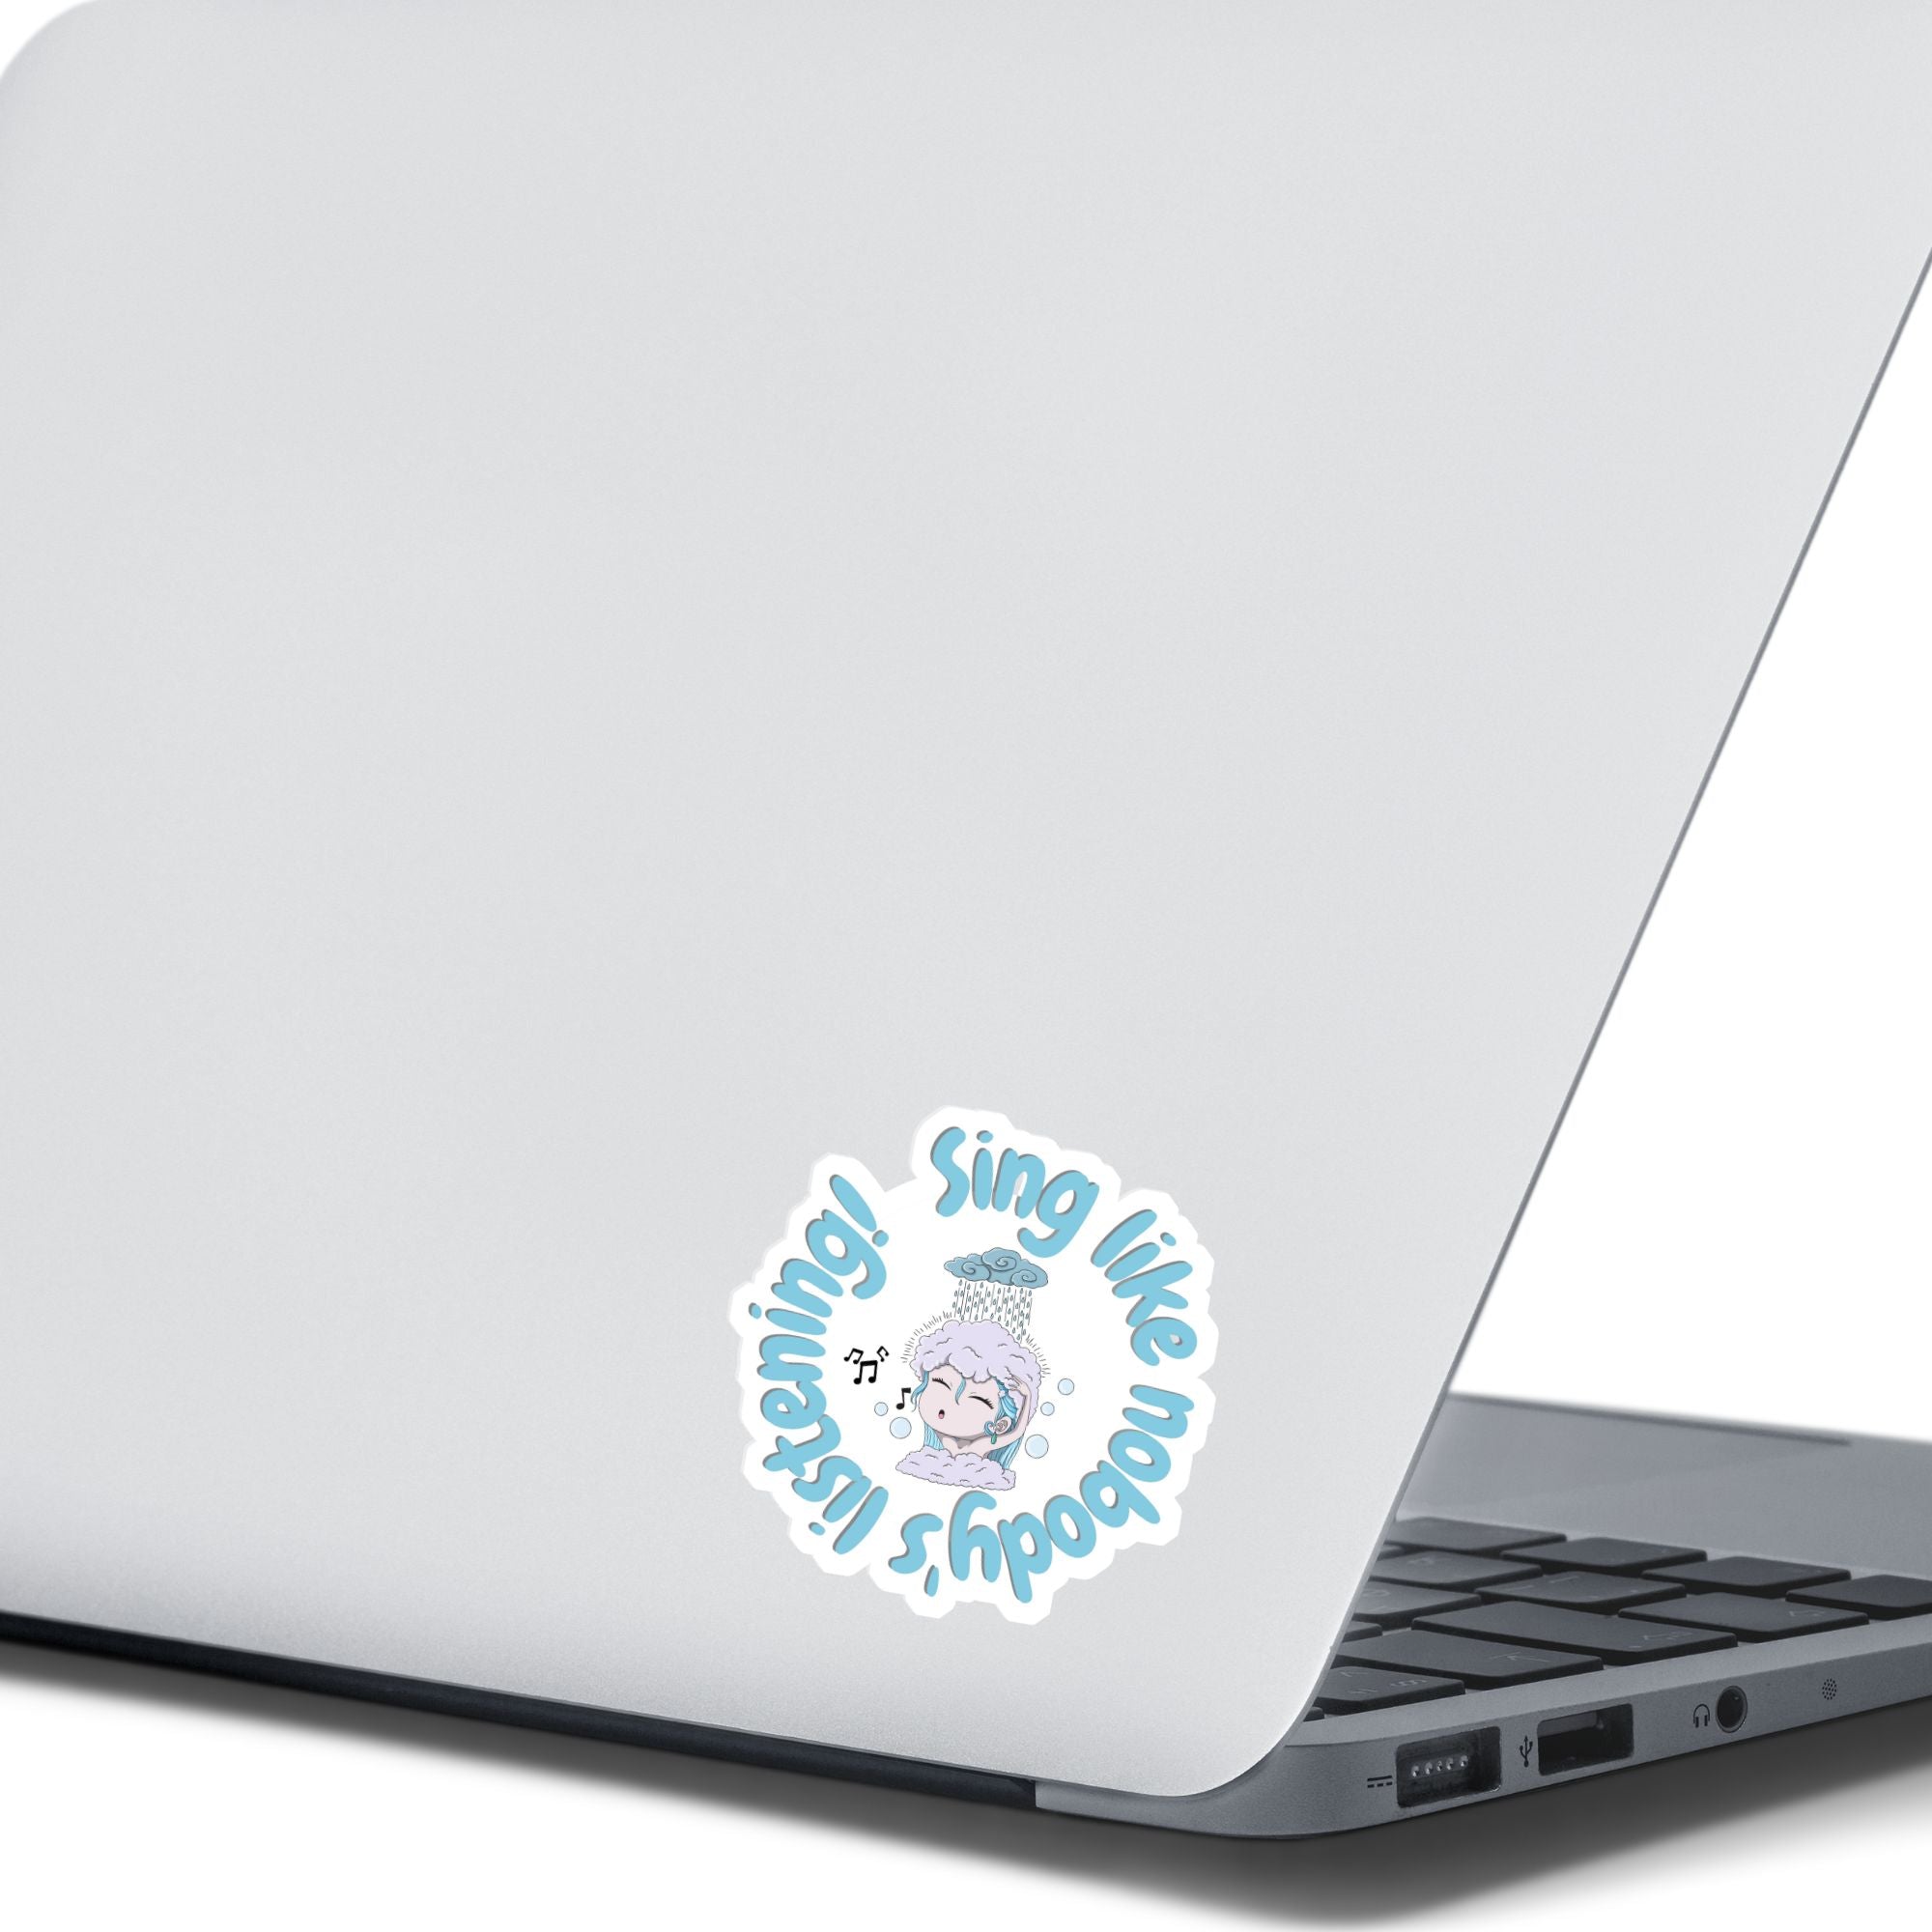 Sing like nobody's listening; dance like nobody's watching. This blue, gray, and white individual die-cut sticker features someone singing in the shower. This image shows the Sing like nobody's listening sticker on the back of an open laptop.